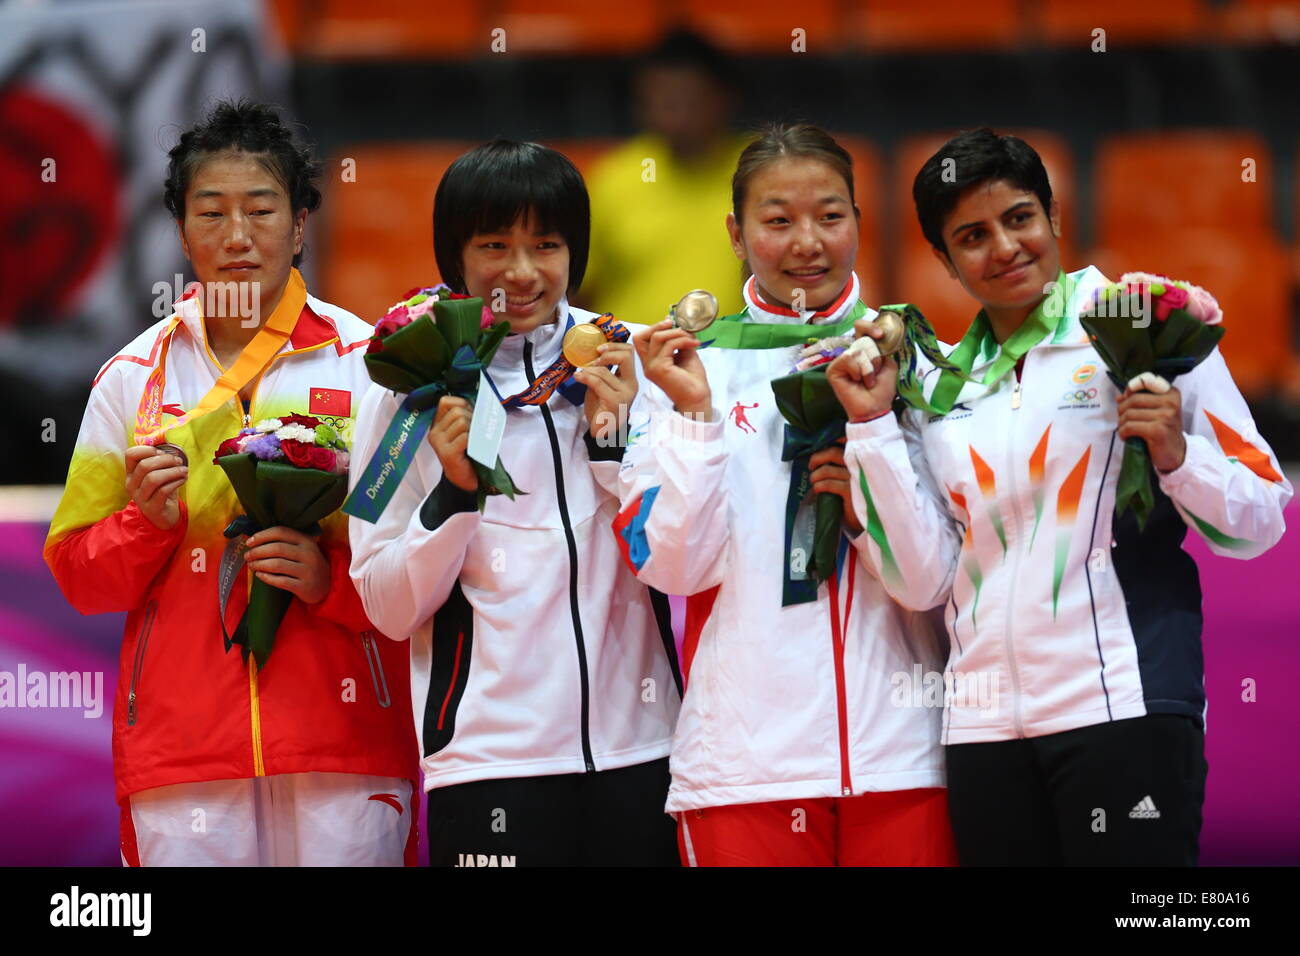 Incheon, South Korea. 27th Sep, 2014. Gold medalist Watari Rio (2nd L) of Japan, silver medalist Xiluo Zhuoma (1st L) of China and bronze medalists Jakhar Geetika (1st R) of India and Sukhee Tserenchimed of Mongolia pose during the awarding ceremony of the women's freestyle 63 kg contest of wrestling at the 17th Asian Games in Incheon, South Korea, Sept. 27, 2014. Watari Rio defeated Xiluo Zhuoma 3-1 and claimed the title. © Fei Maohua/Xinhua/Alamy Live News Stock Photo